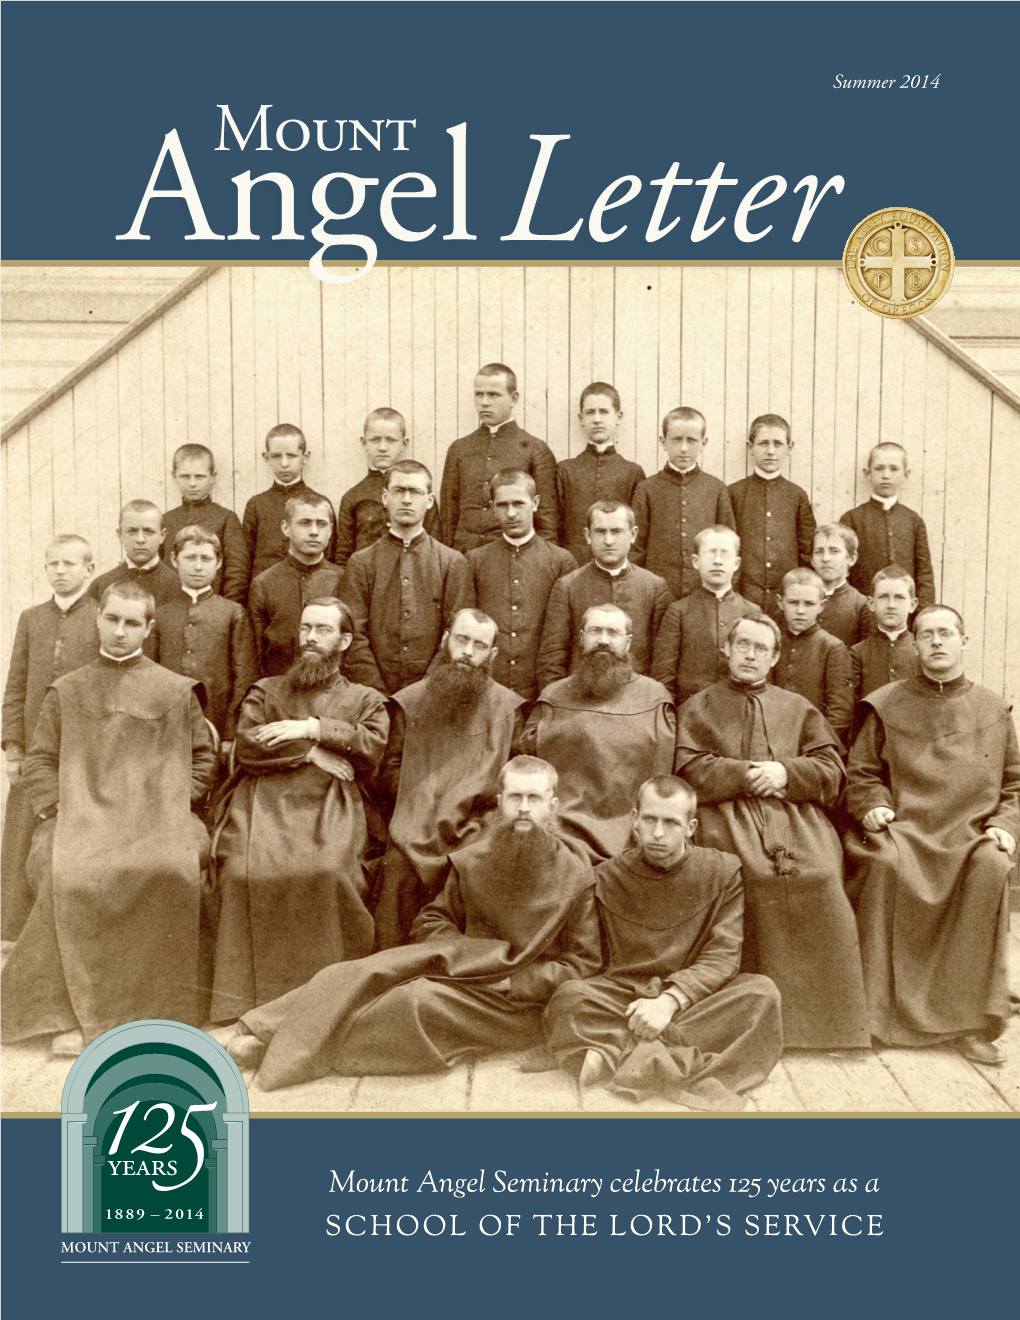 Mount Angel Seminary Celebrates 125 Years As a SCHOOL of the LORD’S SERVICE Mount Angel Letter Inside